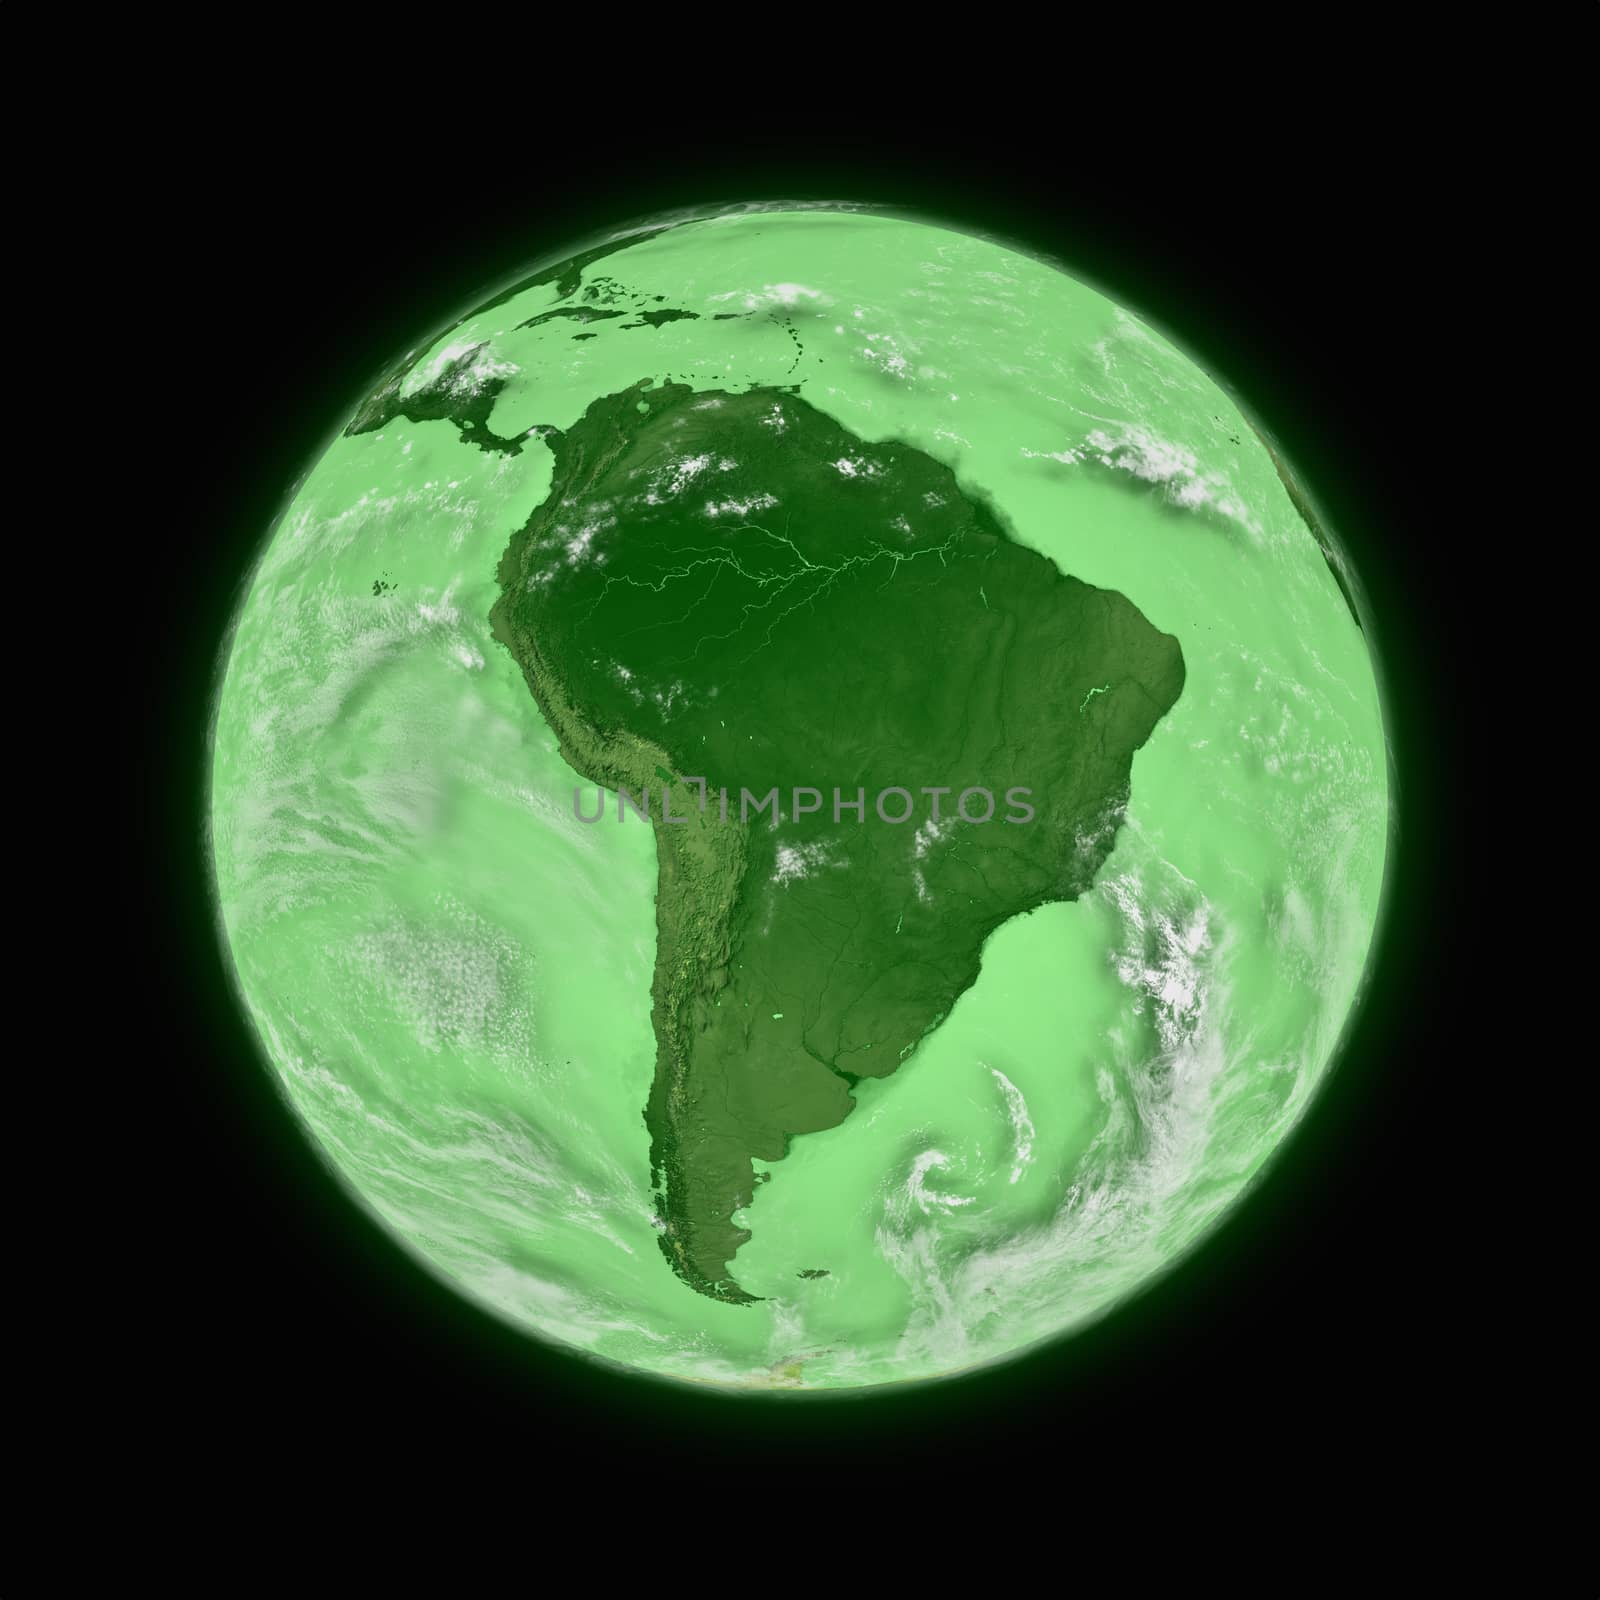 South America on green planet Earth by Harvepino